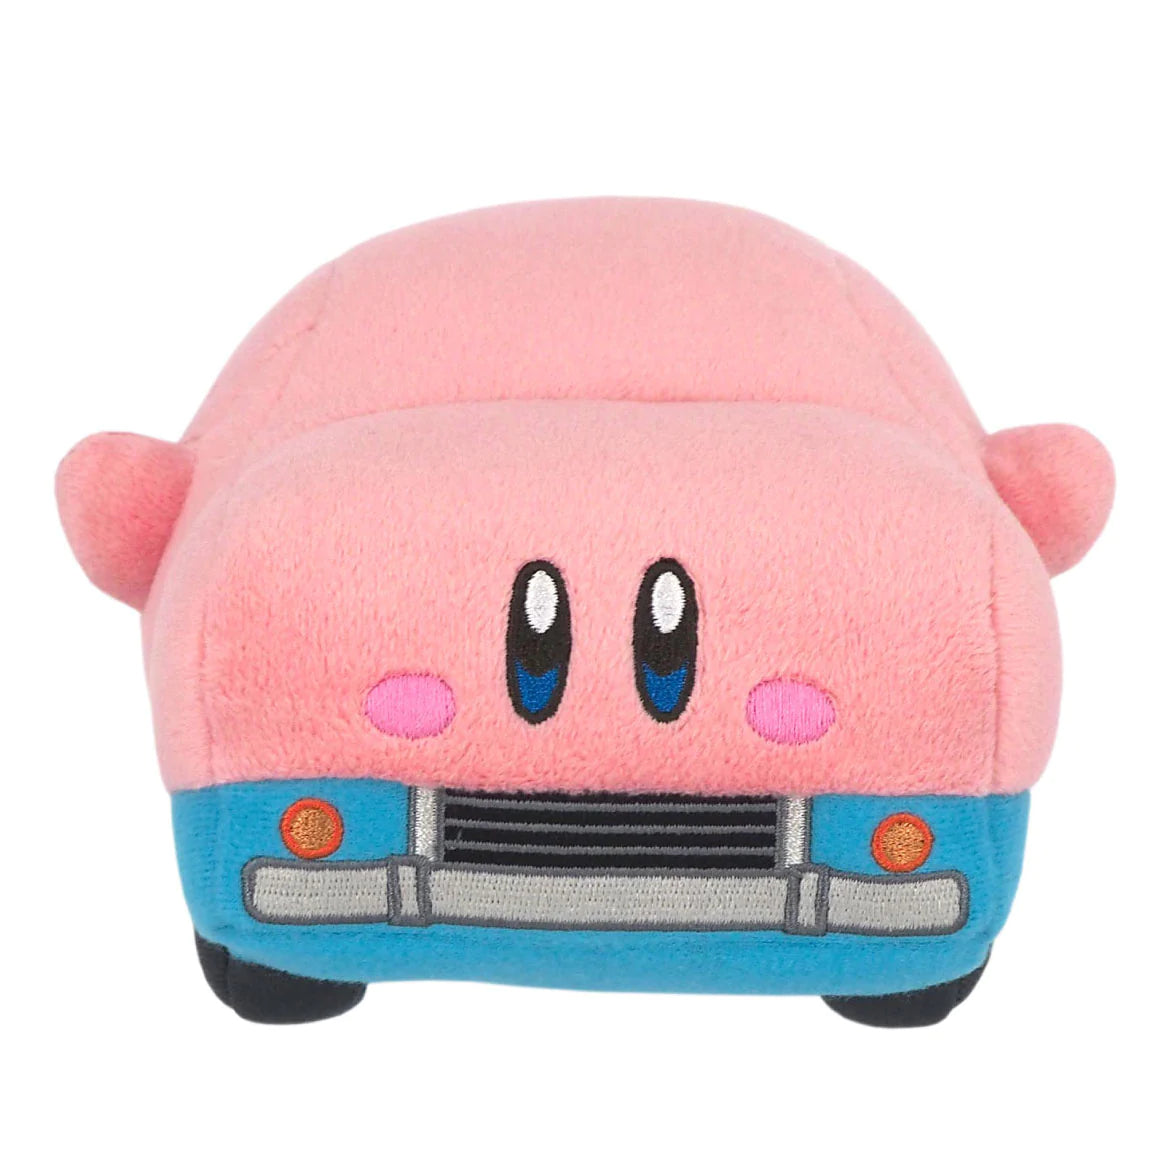 A plush of "mouthful mode" kirby, that looks like a blue car on the bottom and a kirby on top.